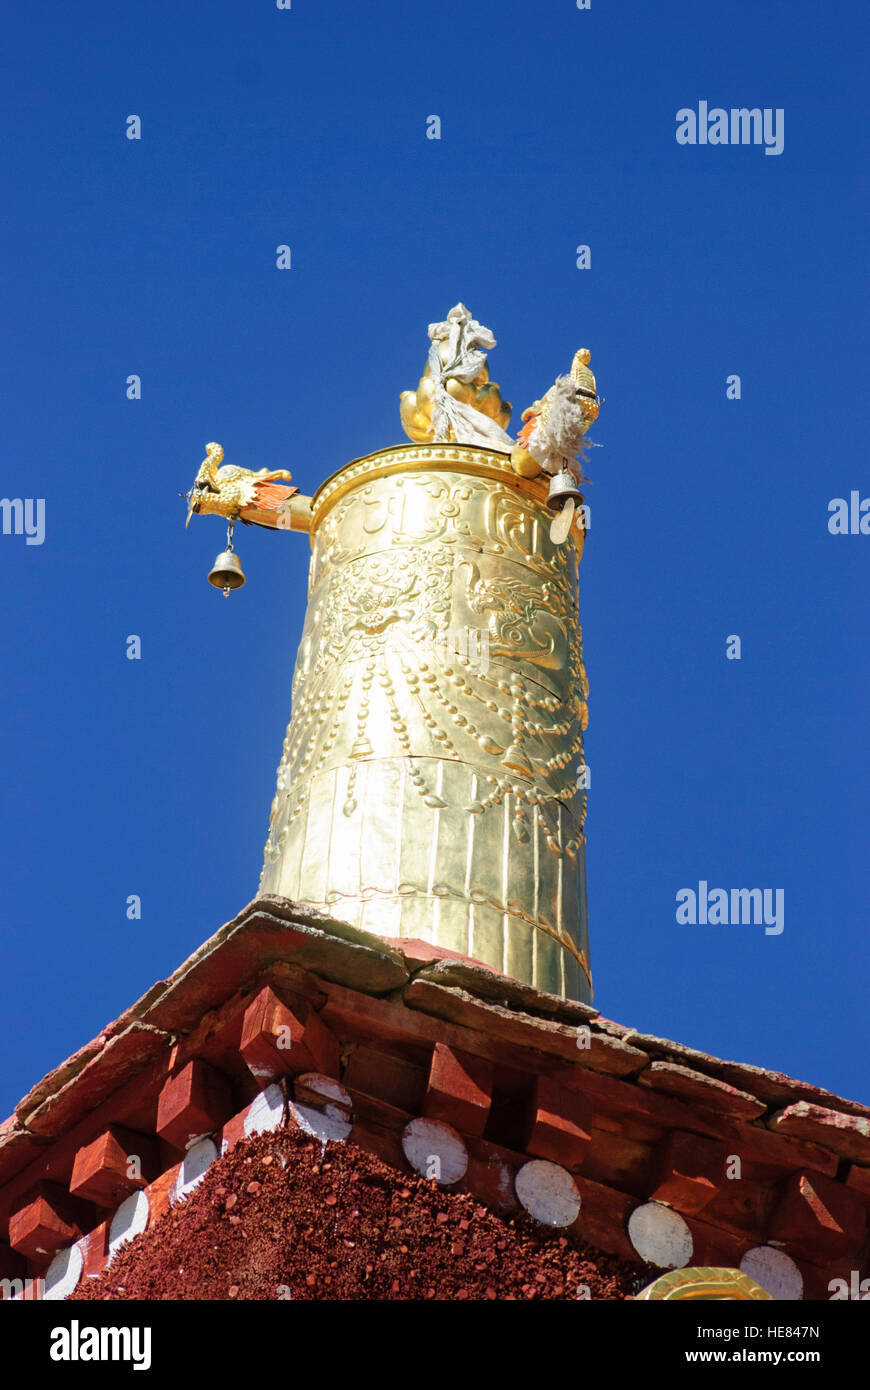 Ganden: Monastery of Ganden: Headquarters of the Gelugpa (Yellow Cap) Order, which also includes the Dalai Lama and the Panchen Lama; Vessel of immort Stock Photo